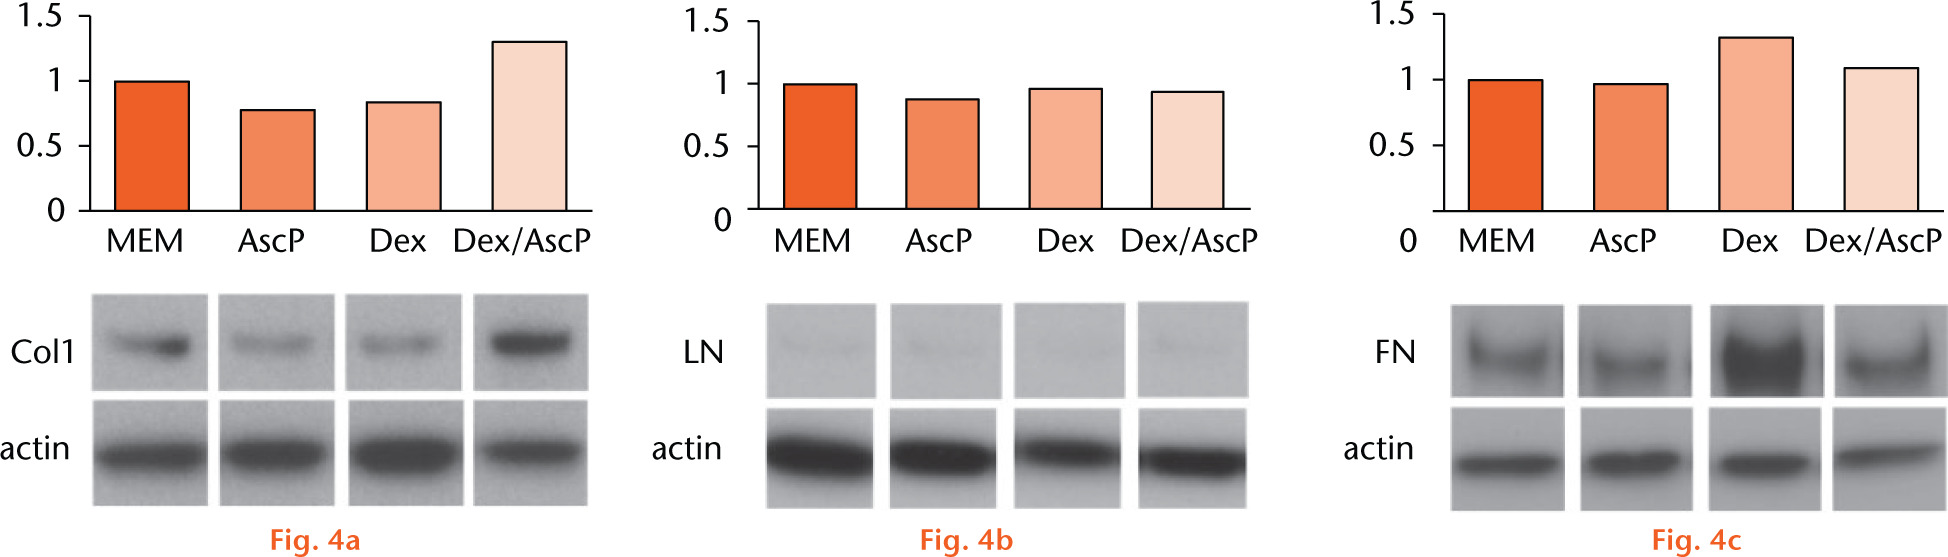  
          Western blots showing that the expression of collagen type I was increased in the Dex/AscP group. The expression ratio of minimal essential medium was defined as 1 unit in the bar figure (upper panel) (Col1, collagen type I; LN, laminin; FN; fibronectin).
        